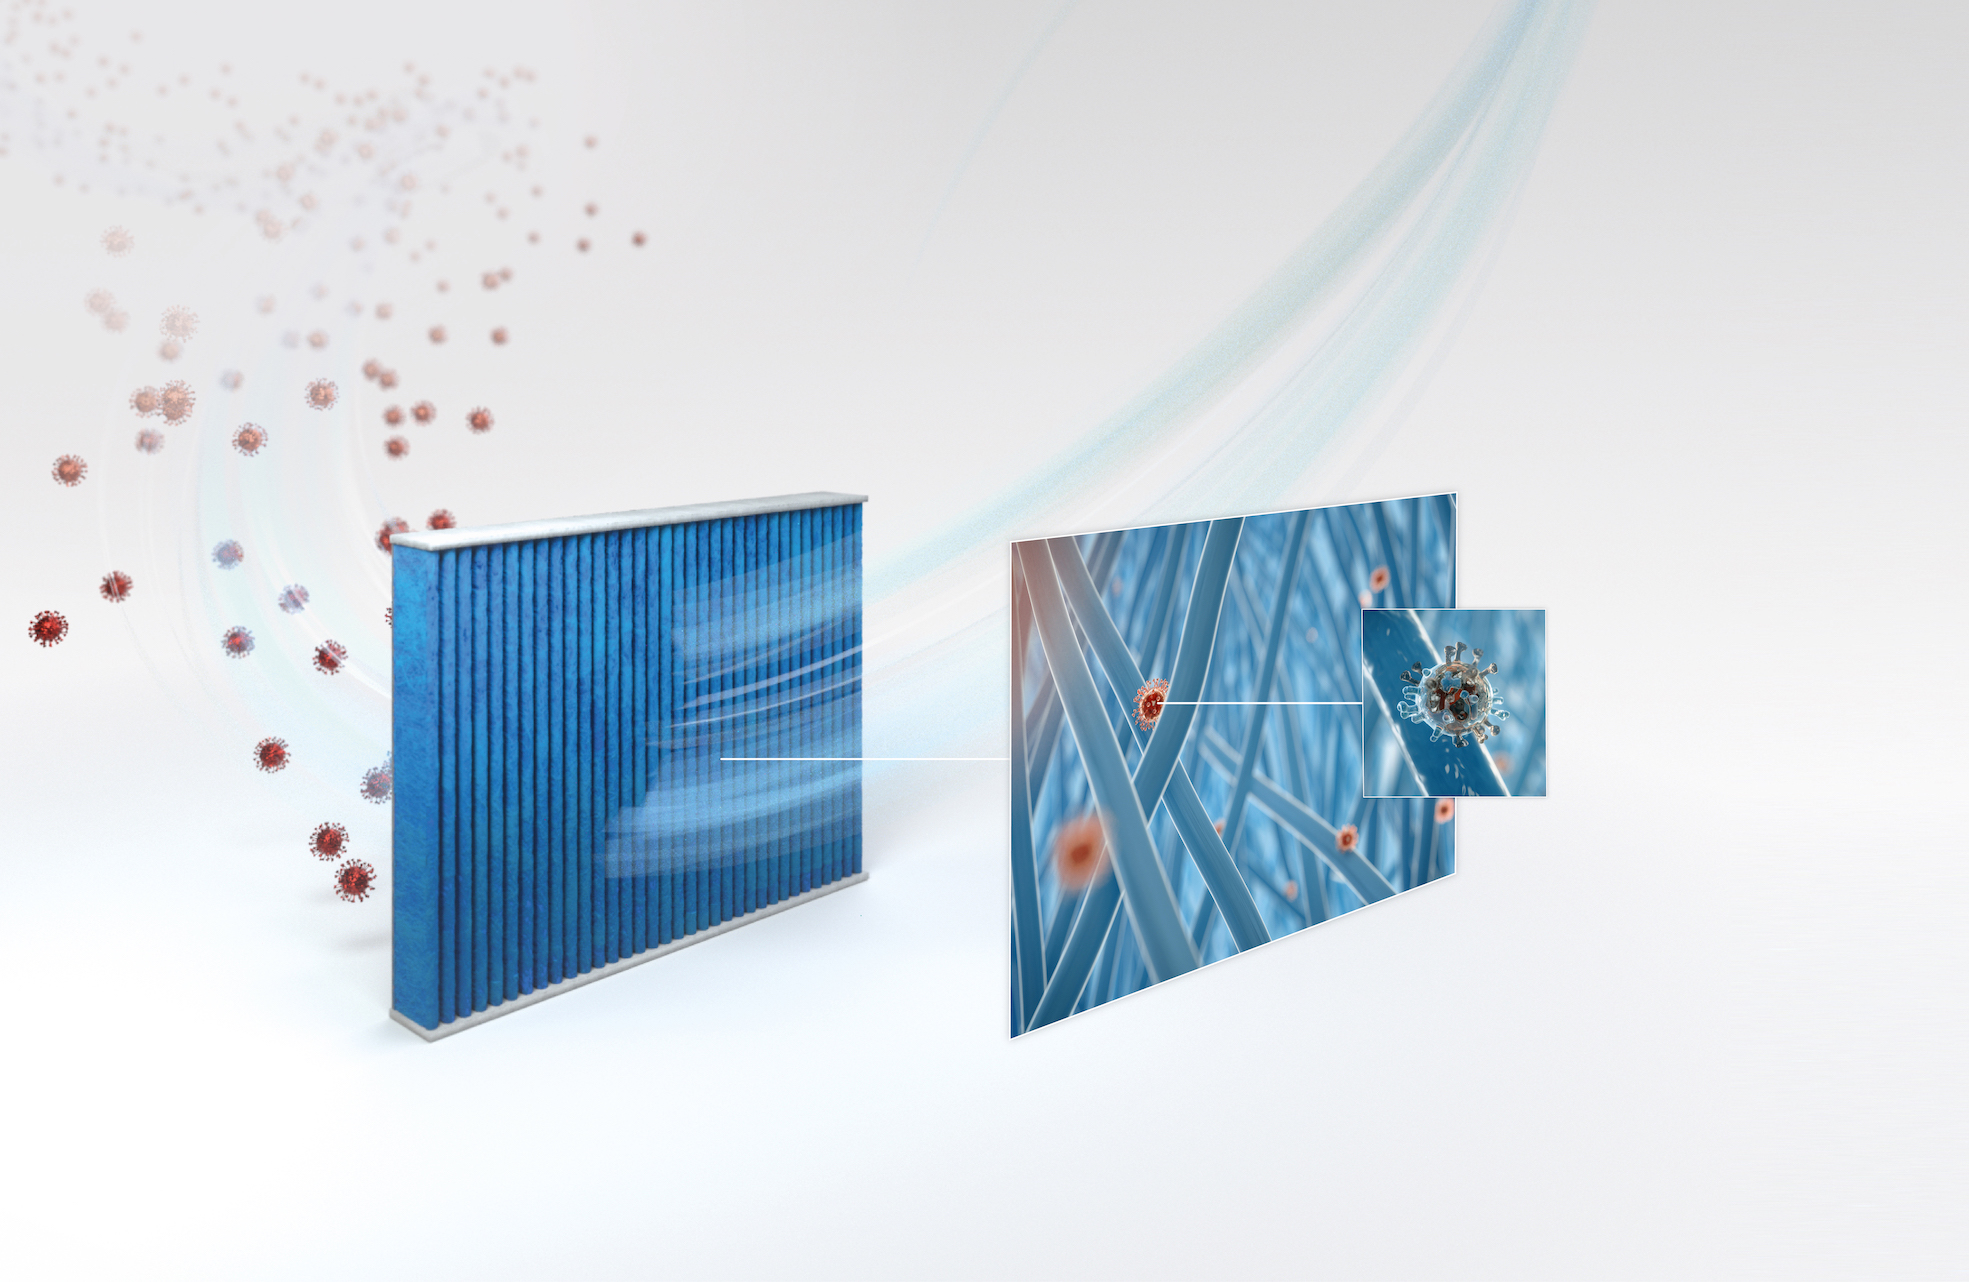 Automotive cabin air filters developed by Freudenberg Filtration Technologies first separate particles and a large proportion of viral areosols and them inactivate them in the filters’ final biofunctional layer impregnated with fruit extracts